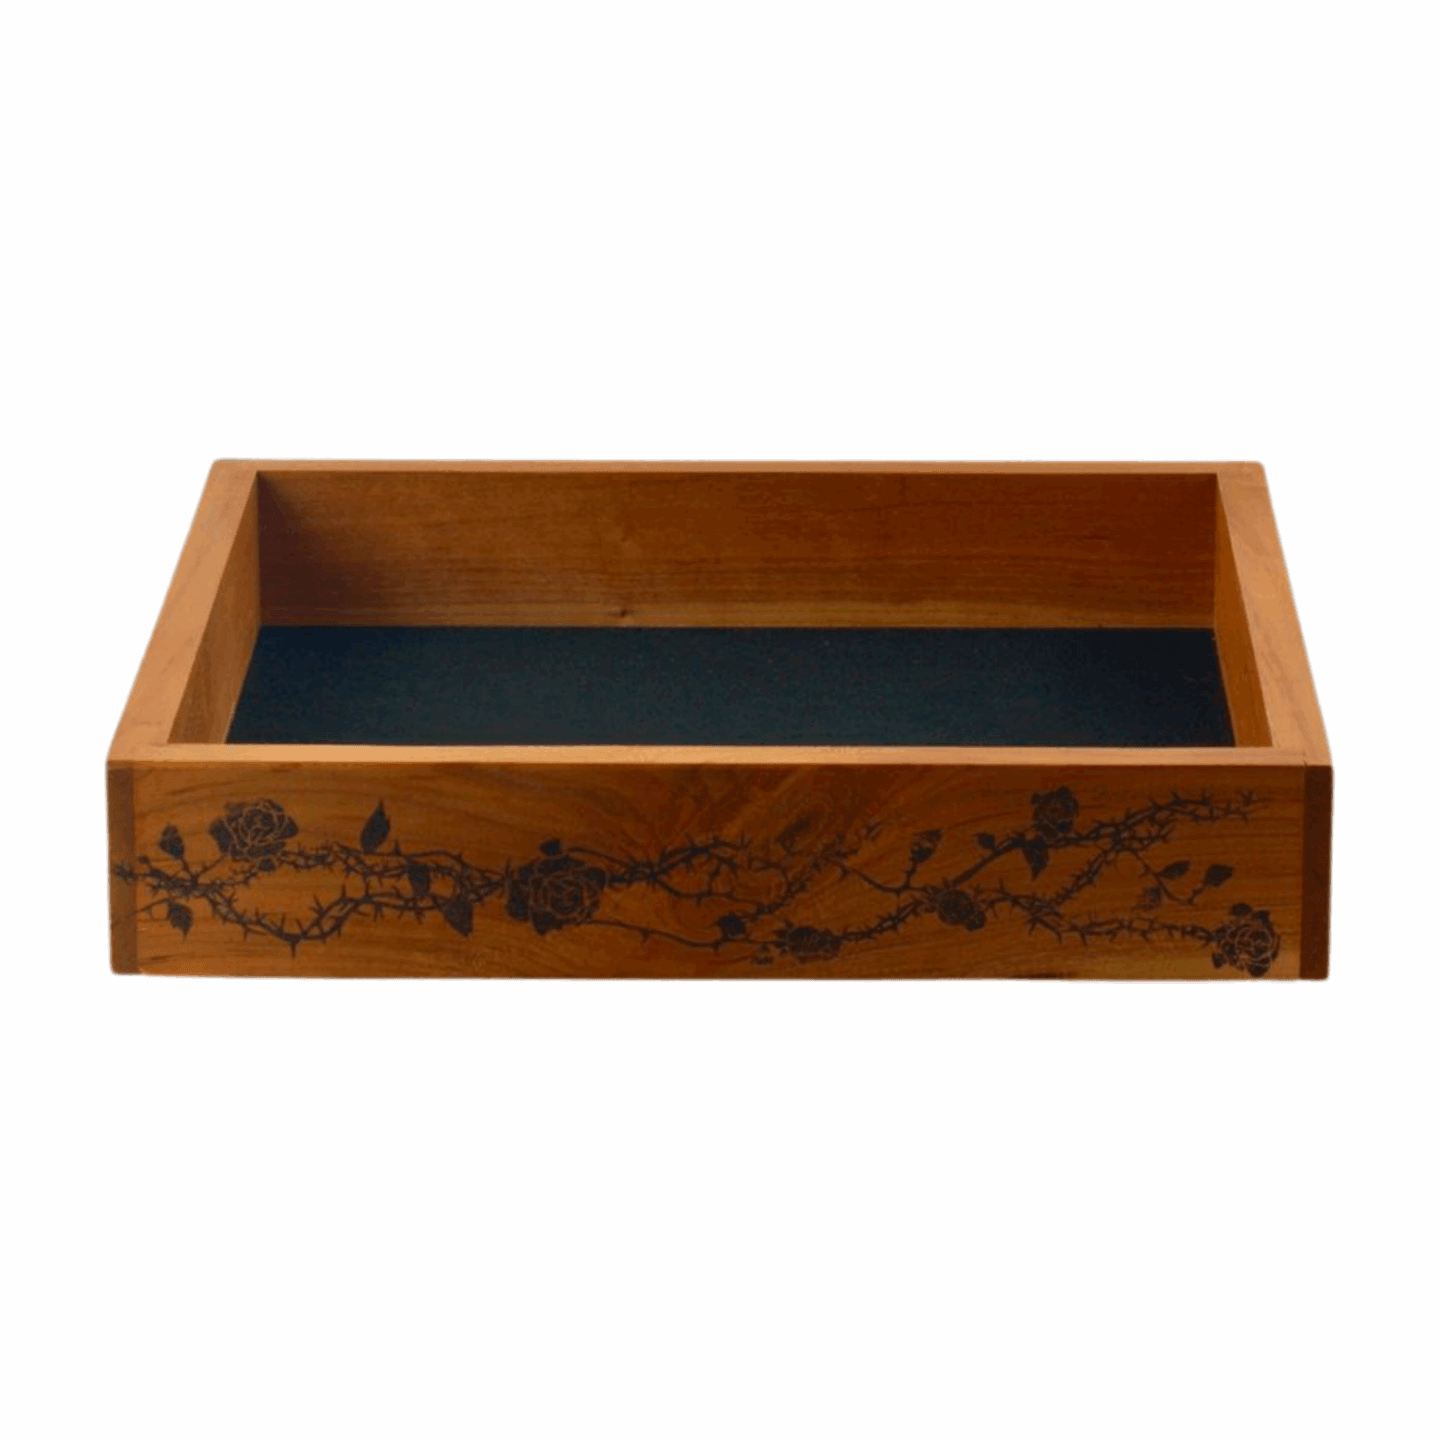 Large Cherry Wood Dice Tray with Rose and Thorn Design for Tabletop Gaming - Dragon Armor Games